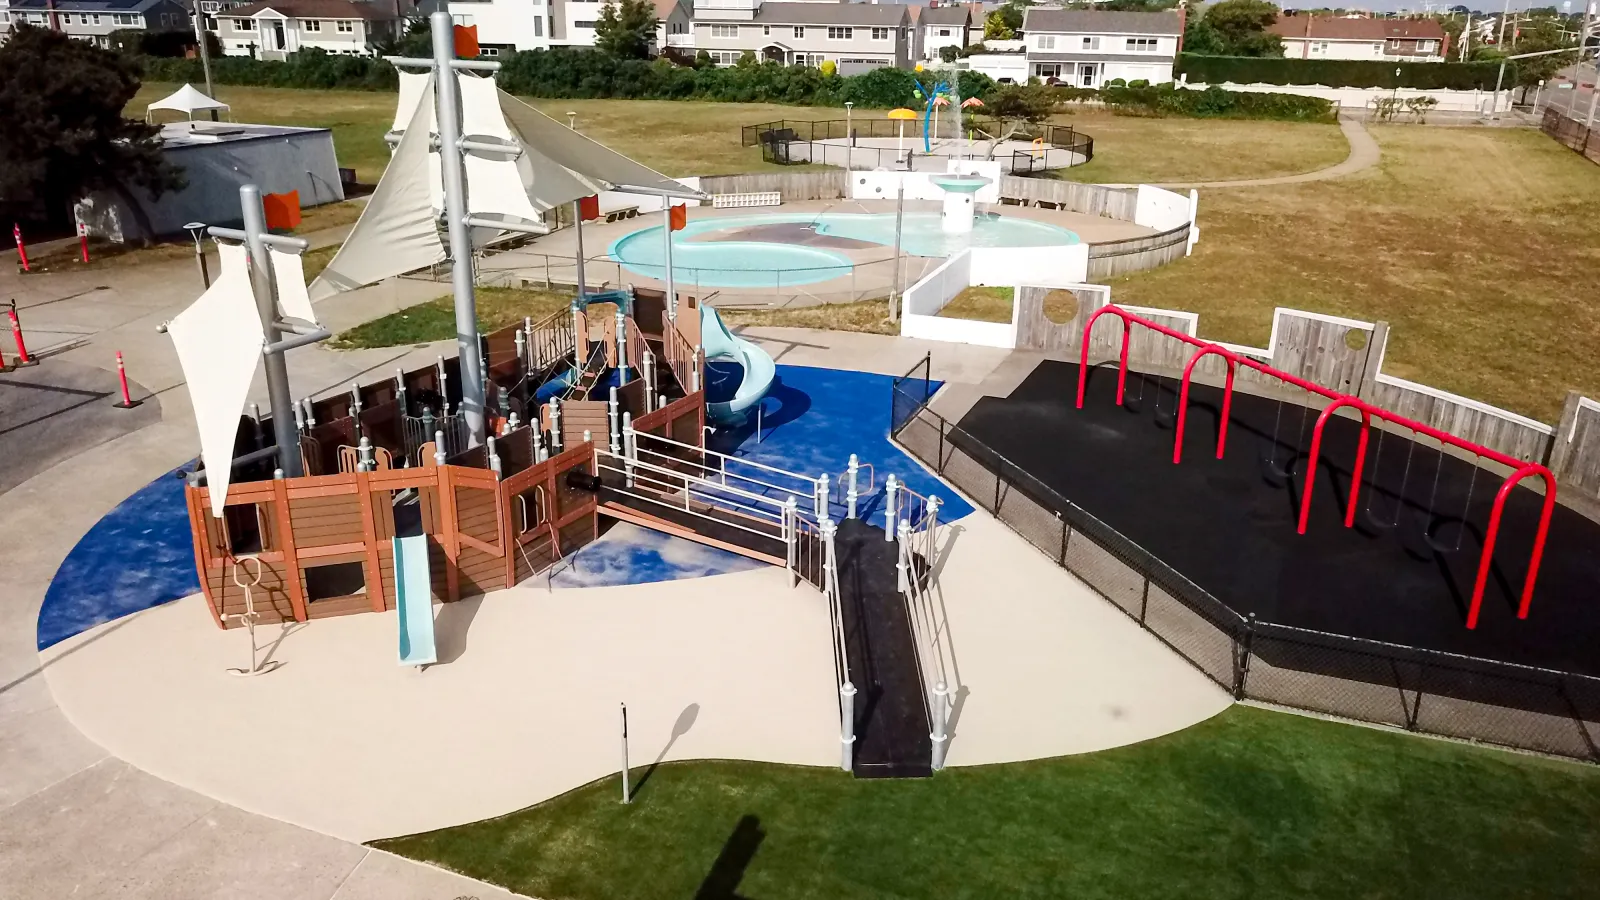 a pool with a slide and a slide in a park